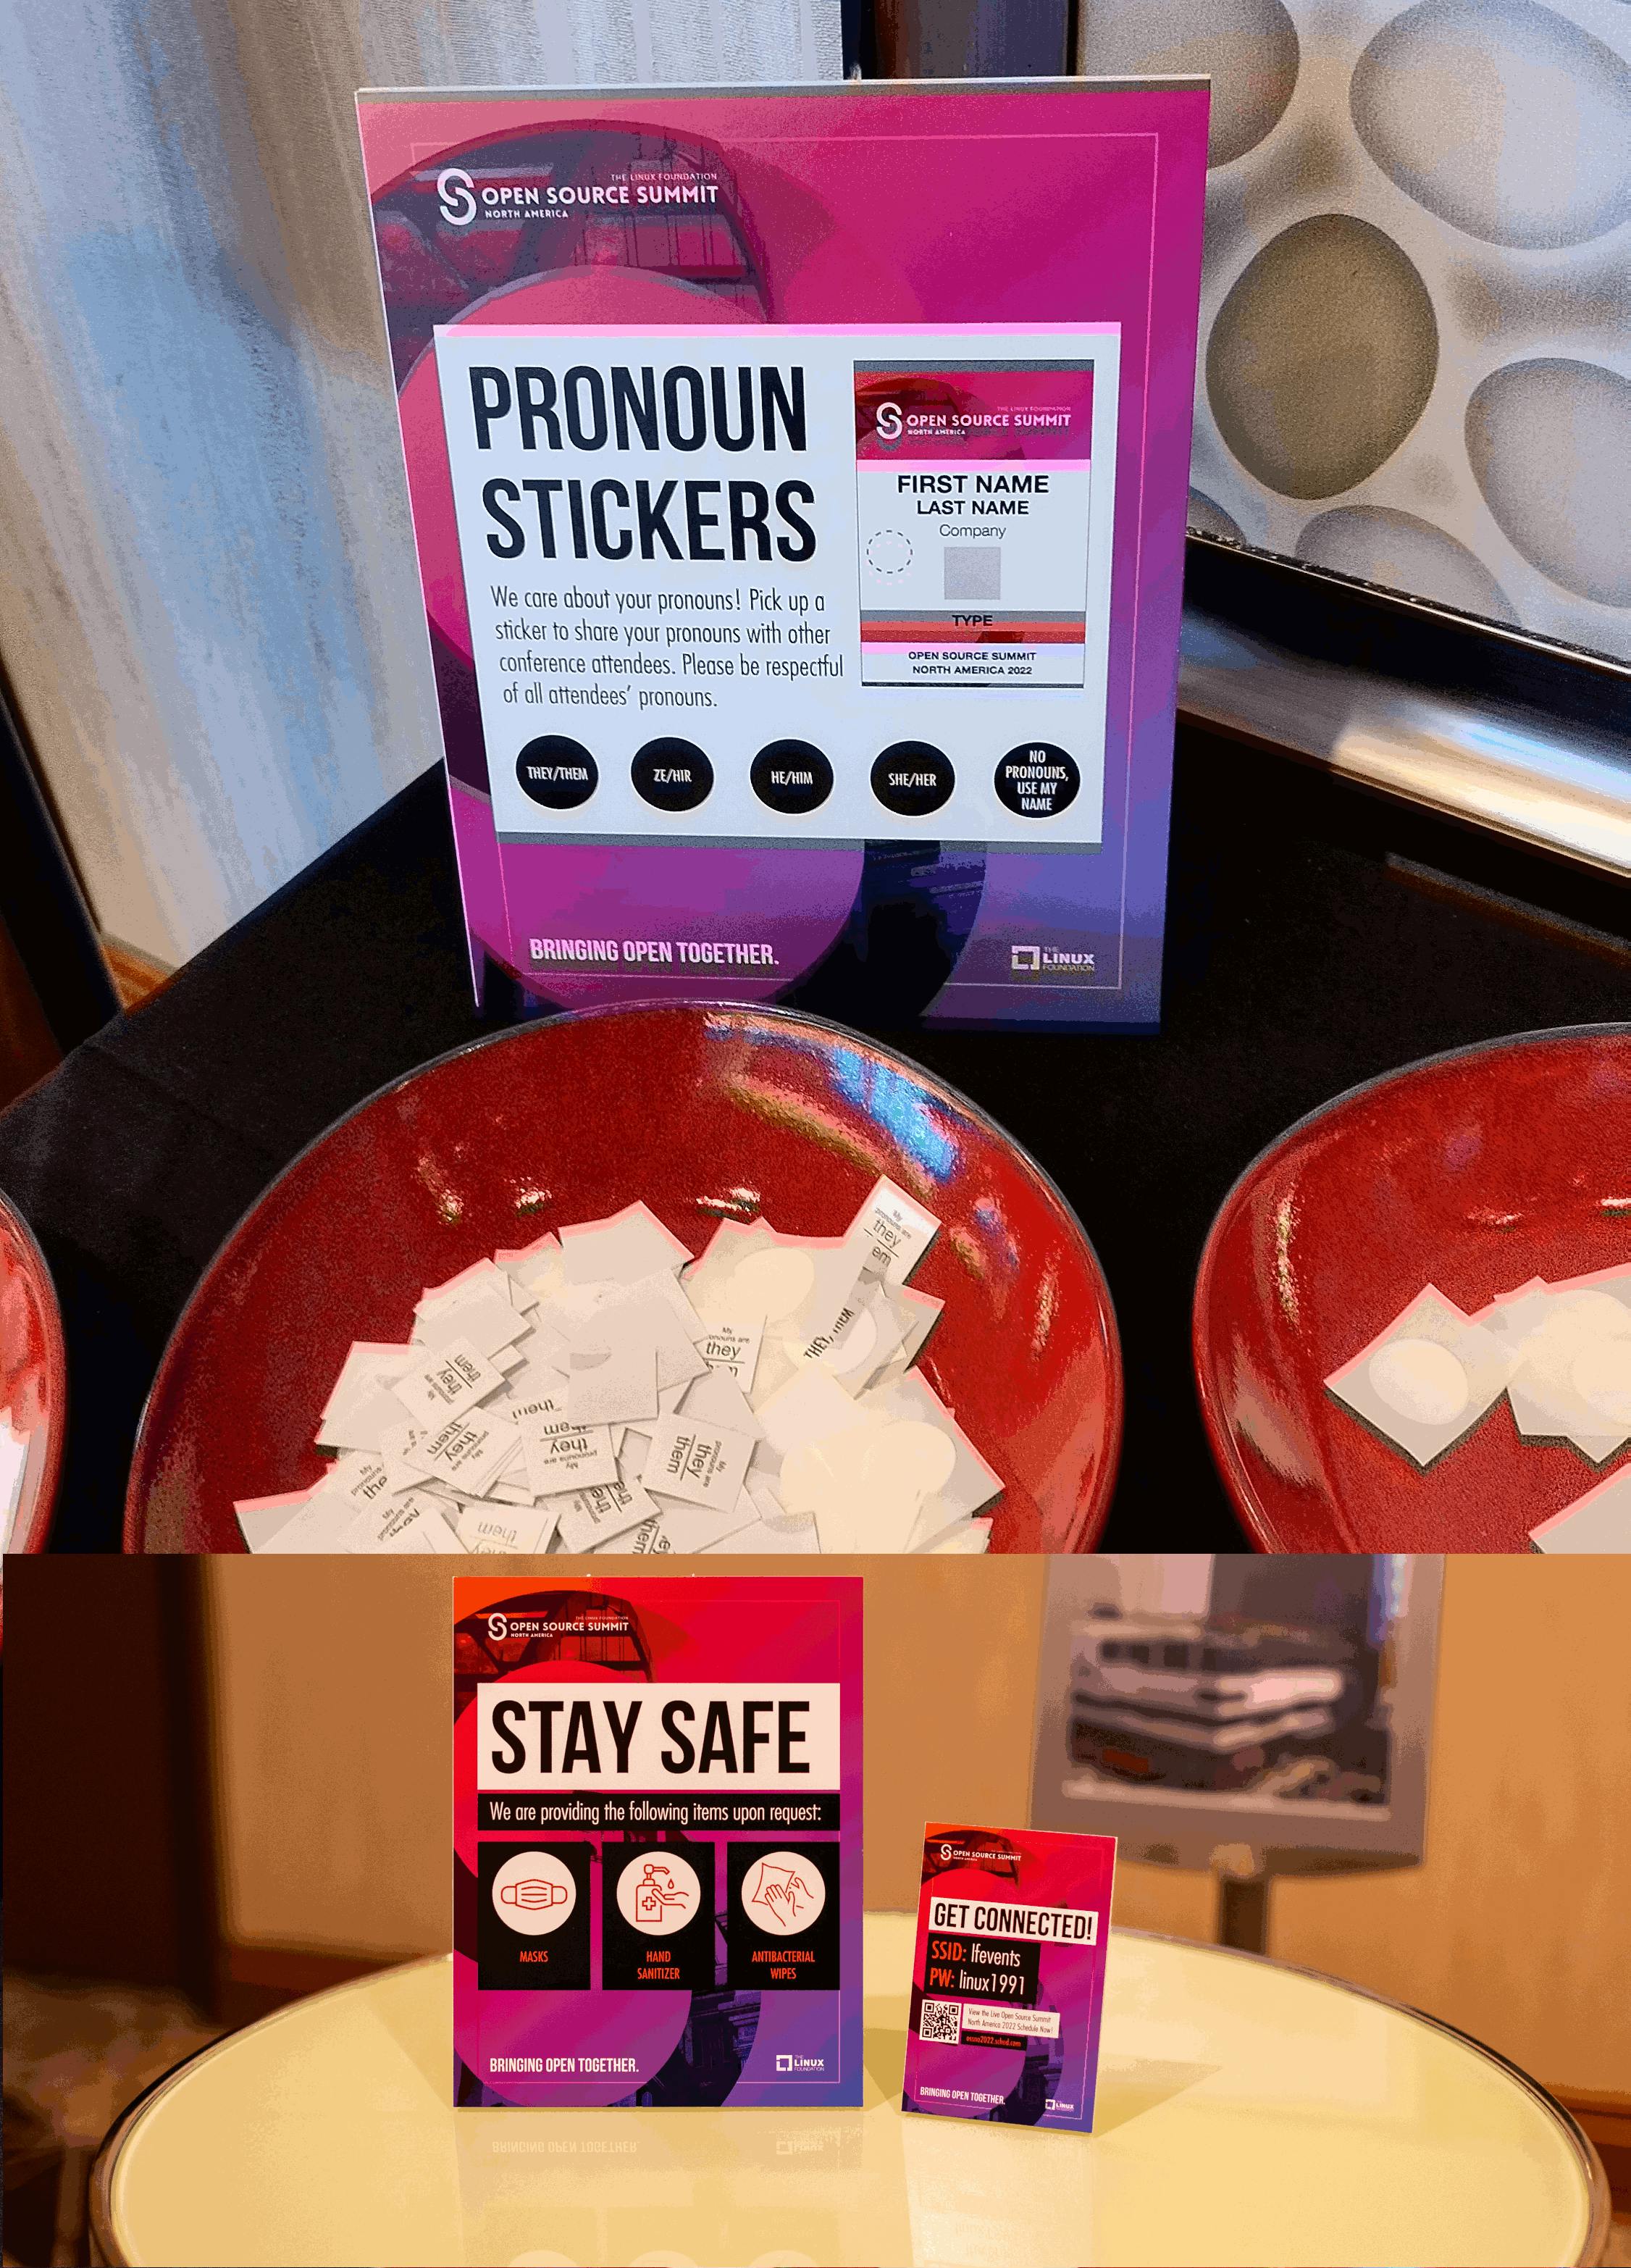 Pronouns and safety stickers